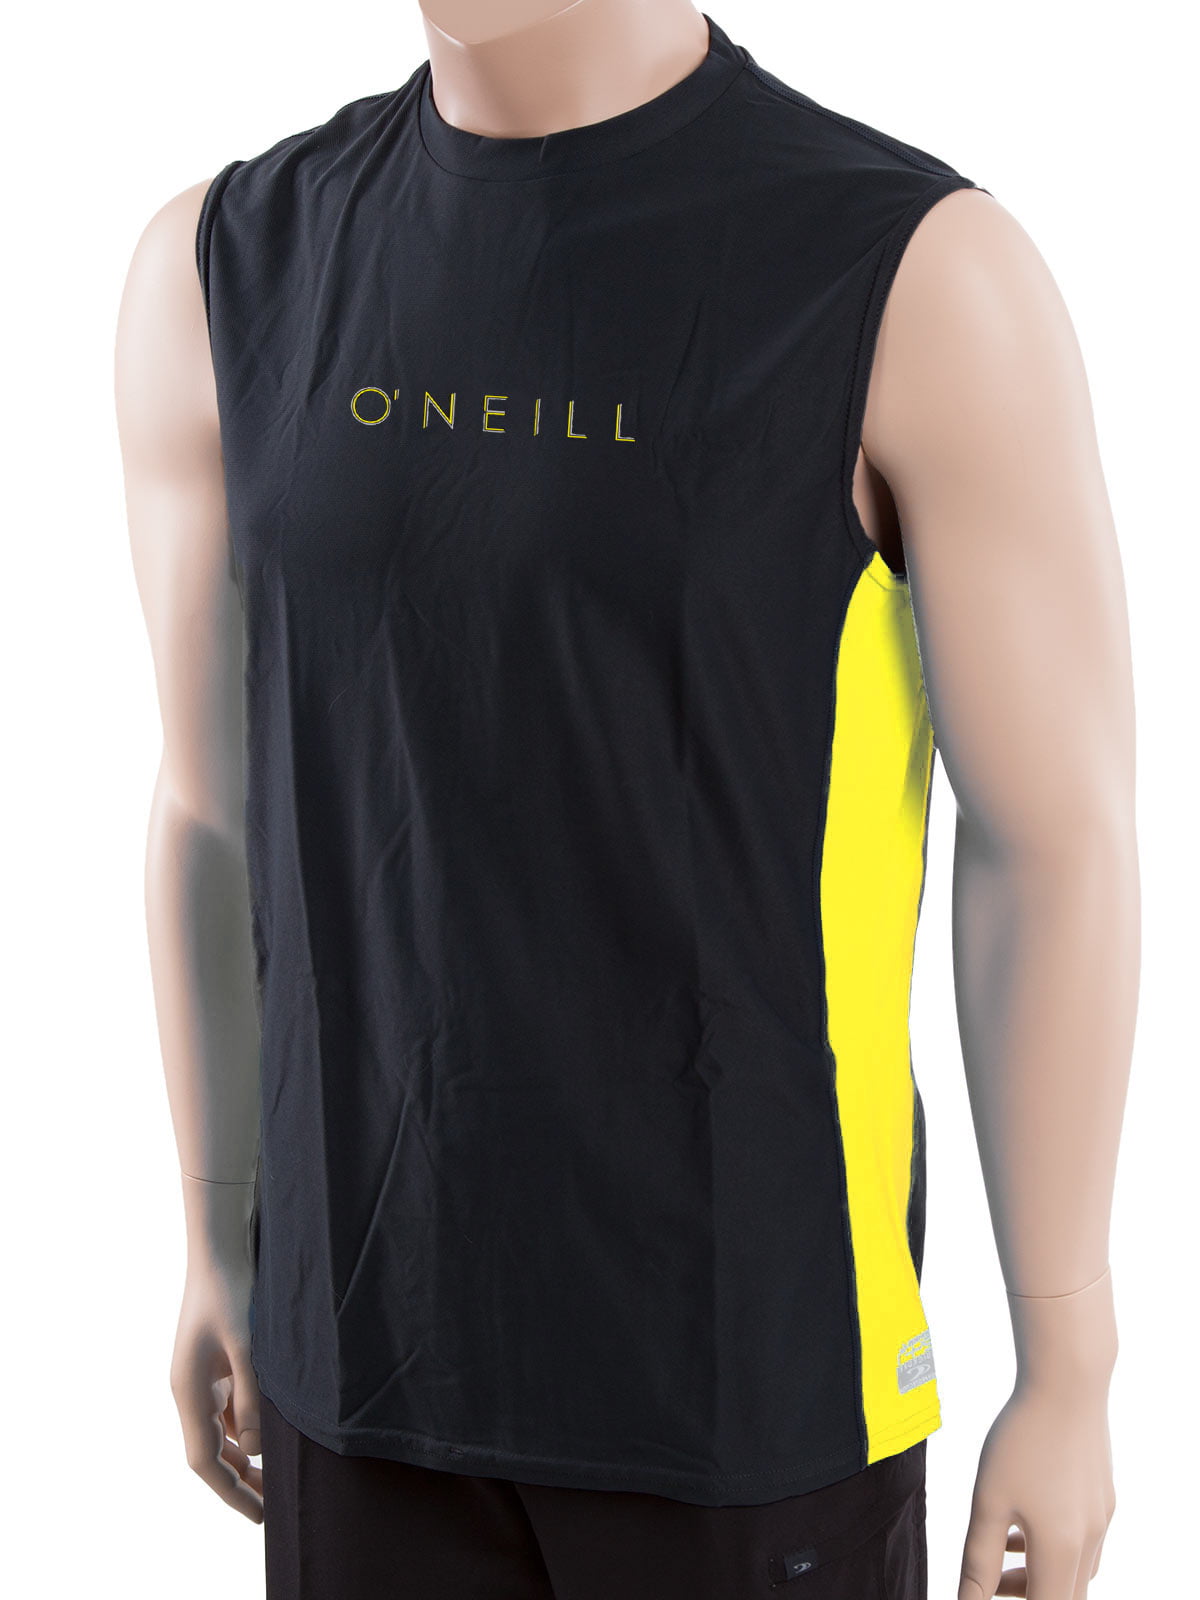 Loose fit ONeill mens 24/7 sleeveless breathable shirt SPF 30